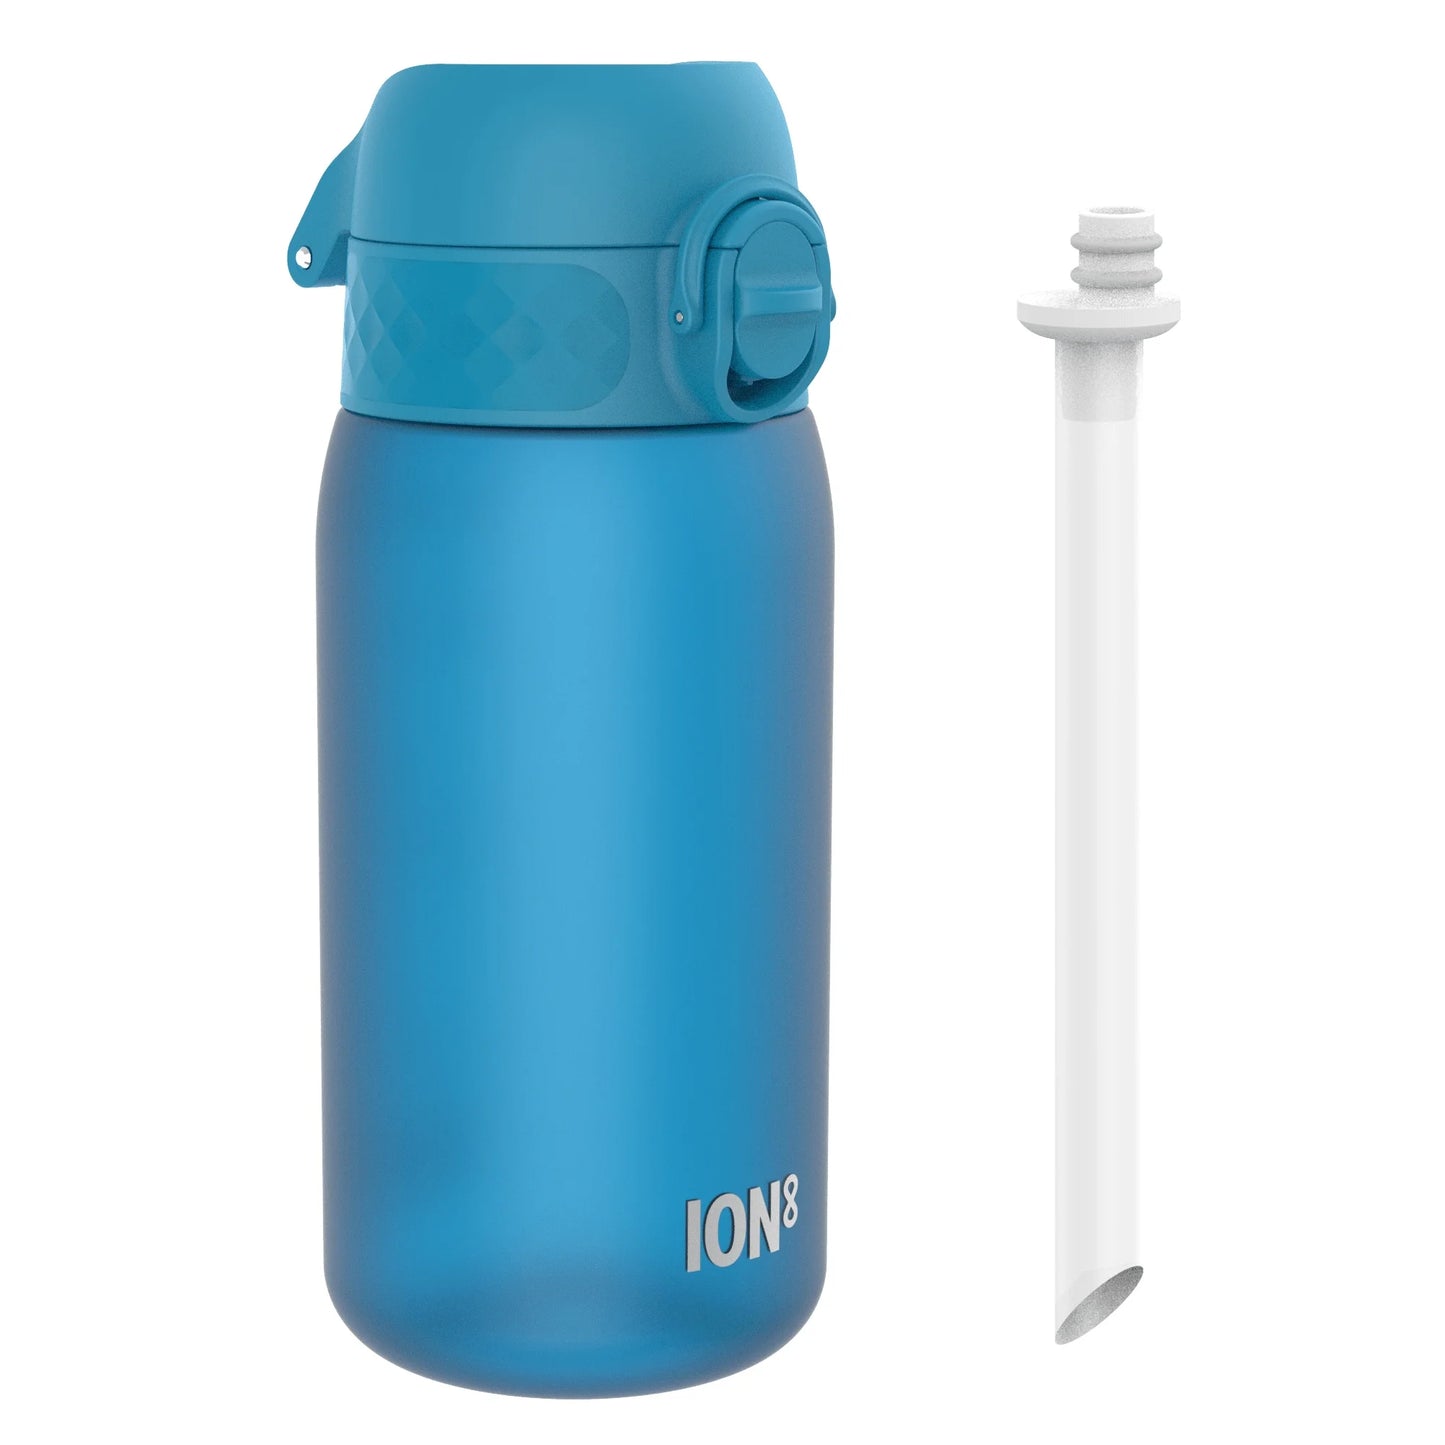 Leak Proof Small Water Bottle With Straw, Recyclon™, Blue, 350ml (12oz)